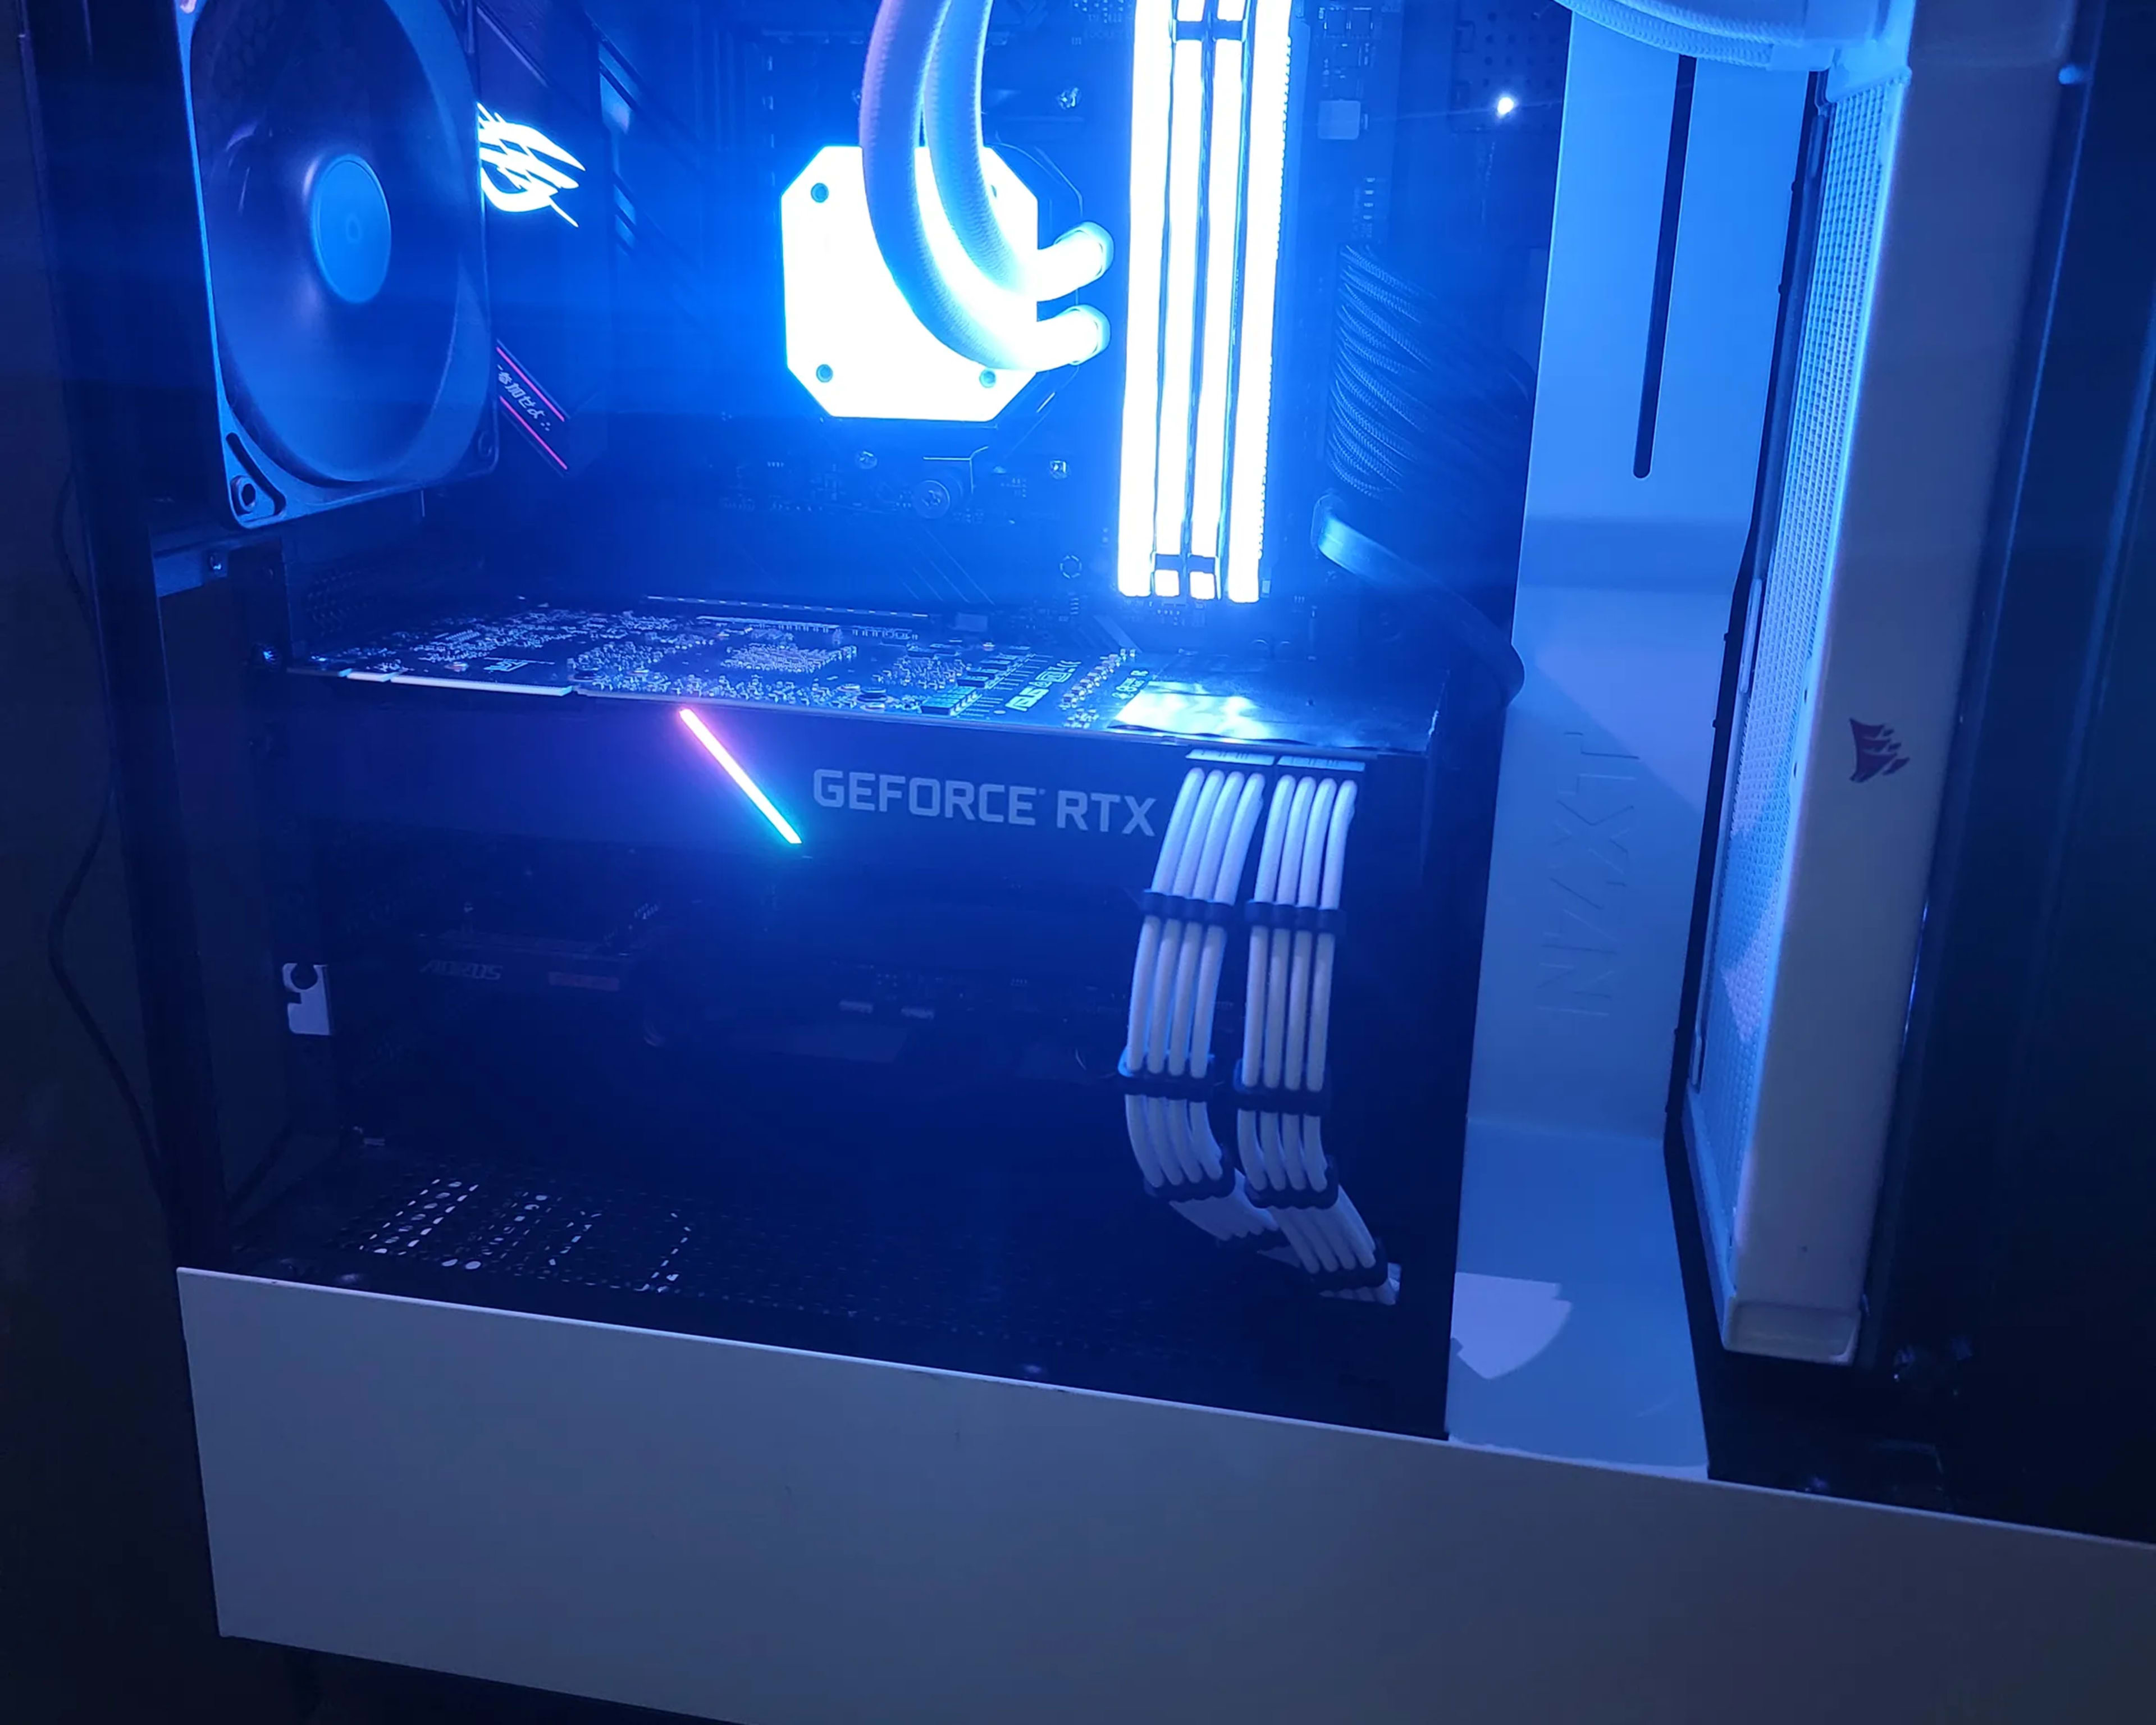 Custom White Rig with Ryzen 7 5800x and RTX 2080 Super. Many extras and no short cuts!